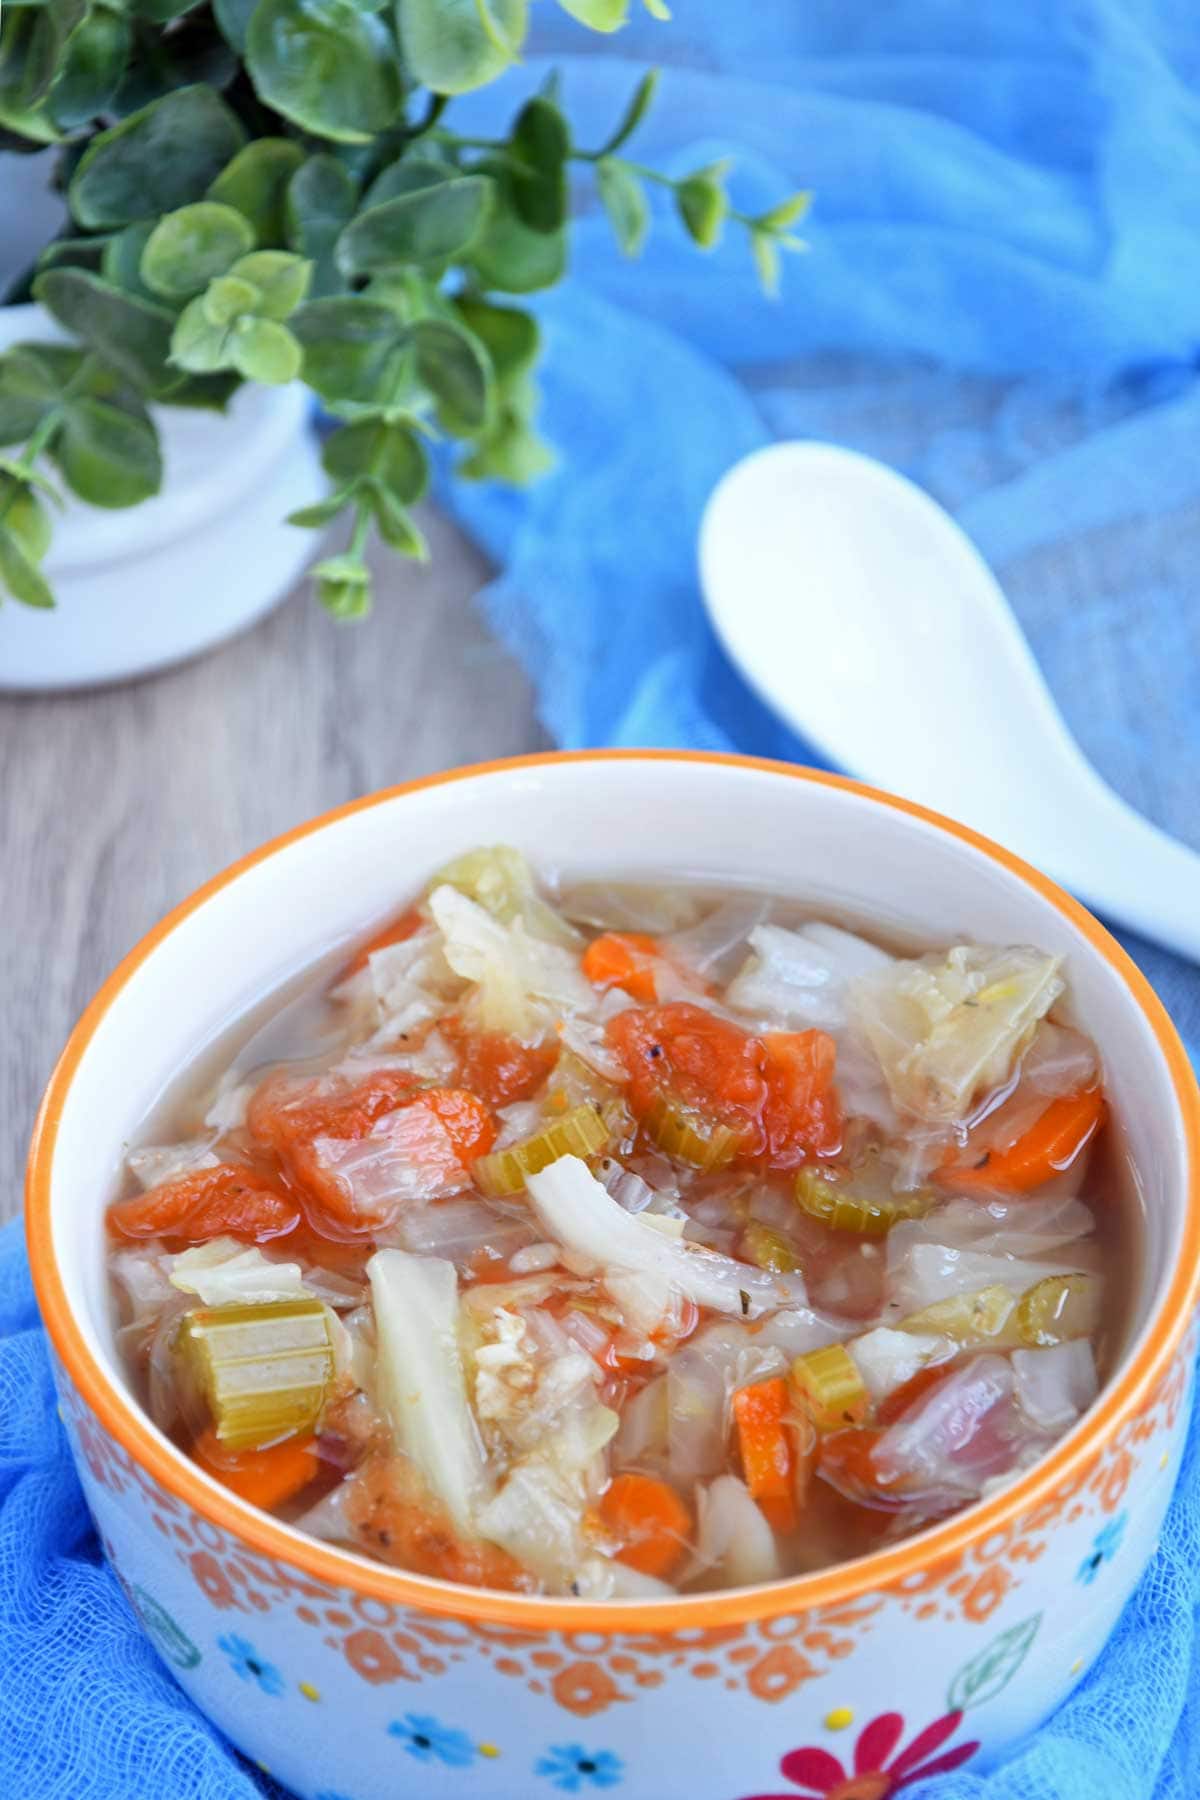 Cabbage soup served in a bowl.